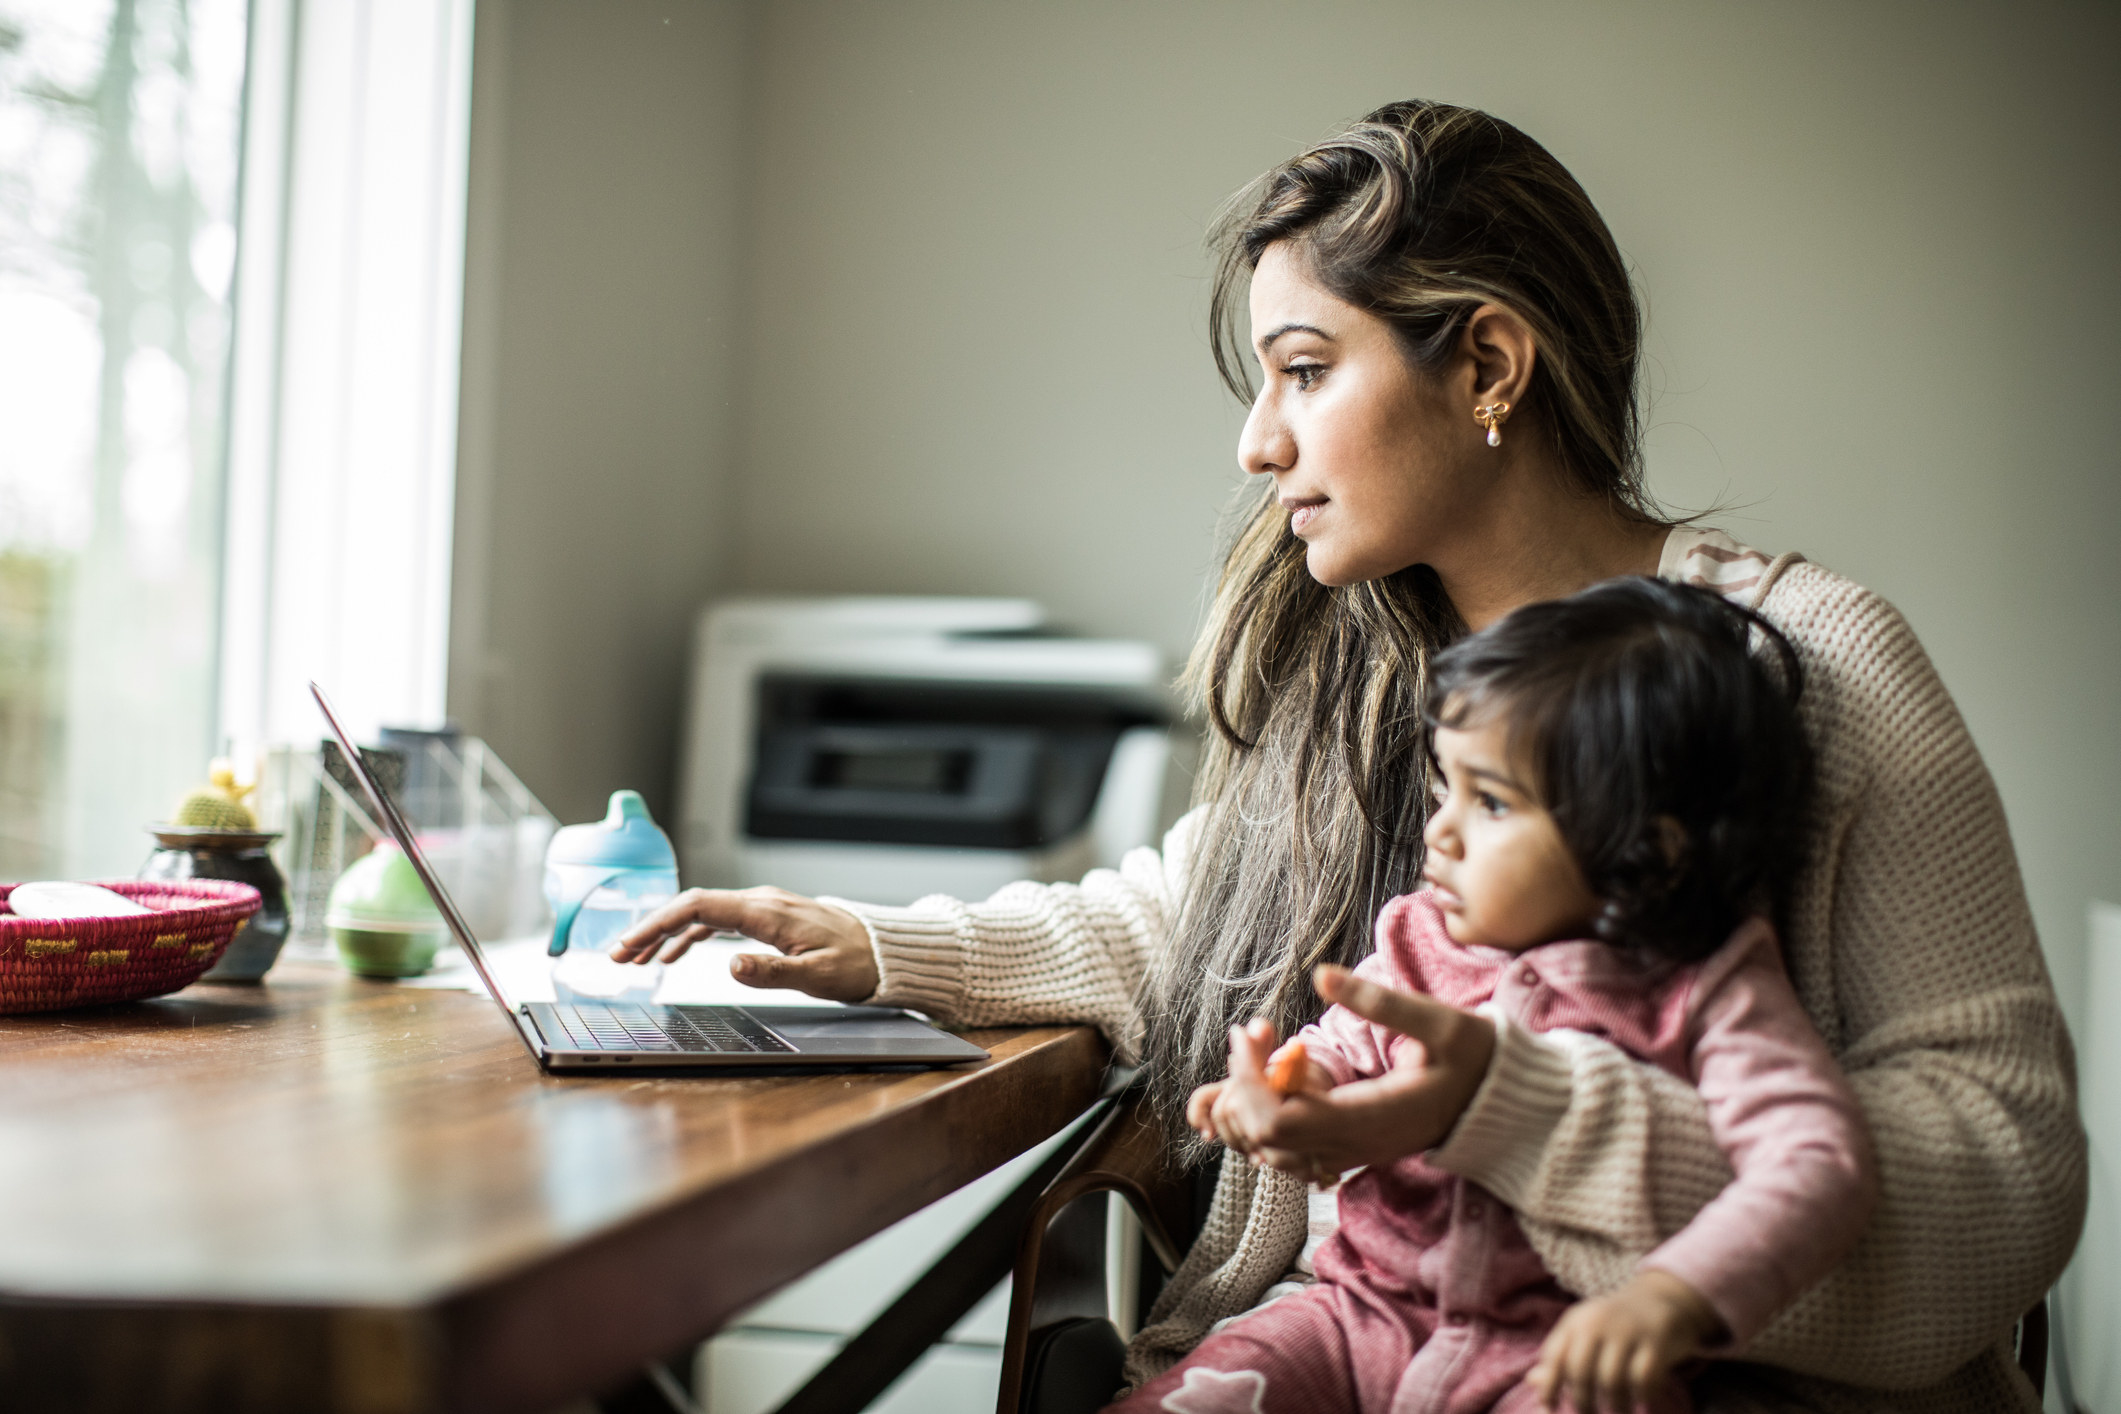 A woman sitting at her desk with her laptop and her baby in her arms